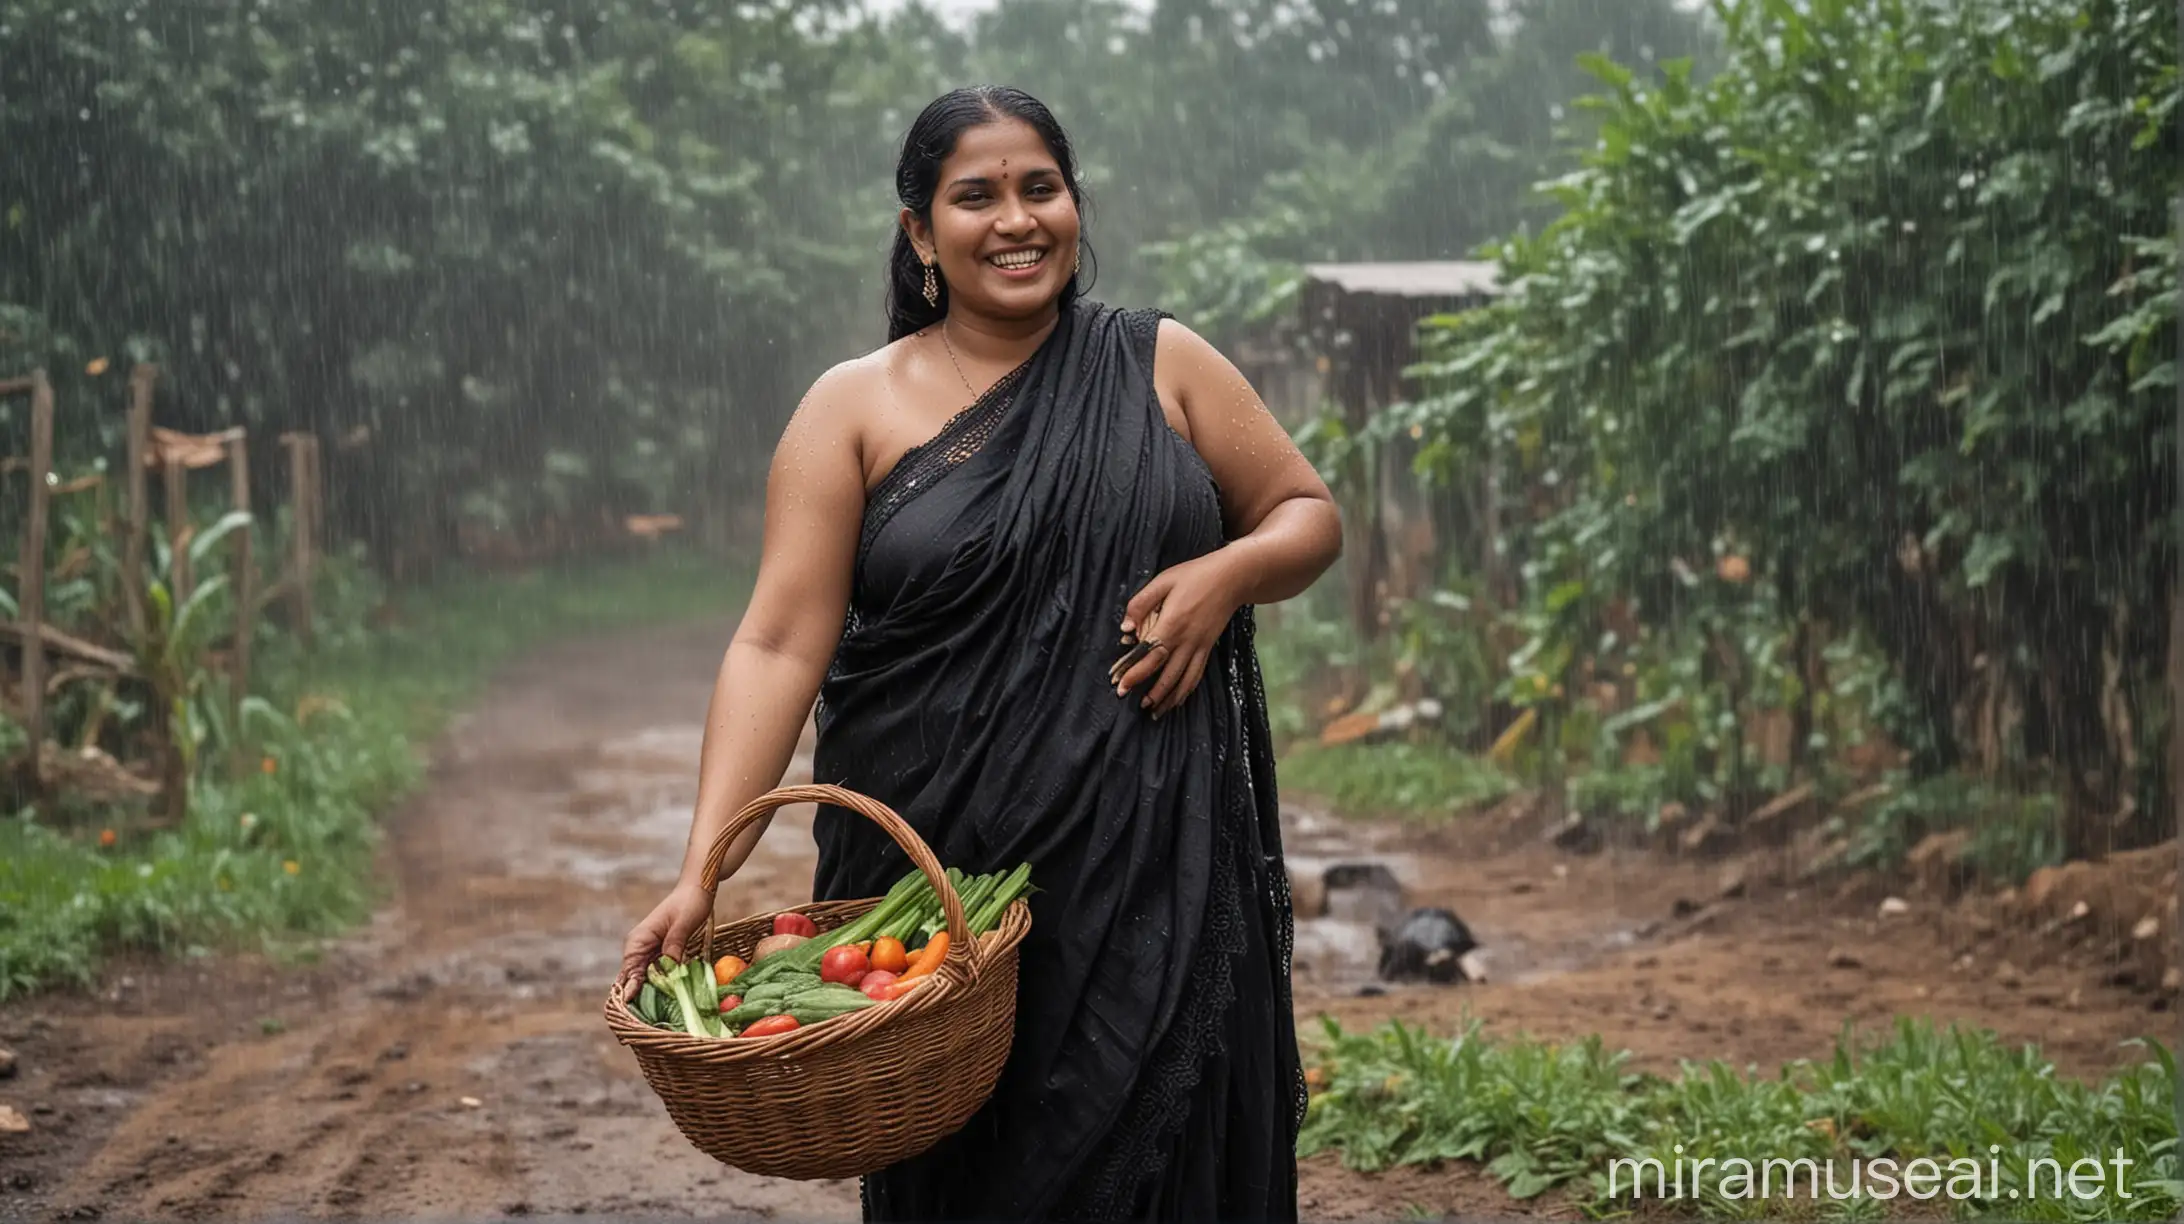 desi mature   very fat aunty 47 years old  fat and wearing sindur, and magalsutra  and wearing a big neck lace  . she has curvy muscular figure.  and she is happy and smiling and laughing and standing near a cow     . she is wearing a black bath towel, she has long thick hair.    its raining . she is standing holding a basket of vegitables.